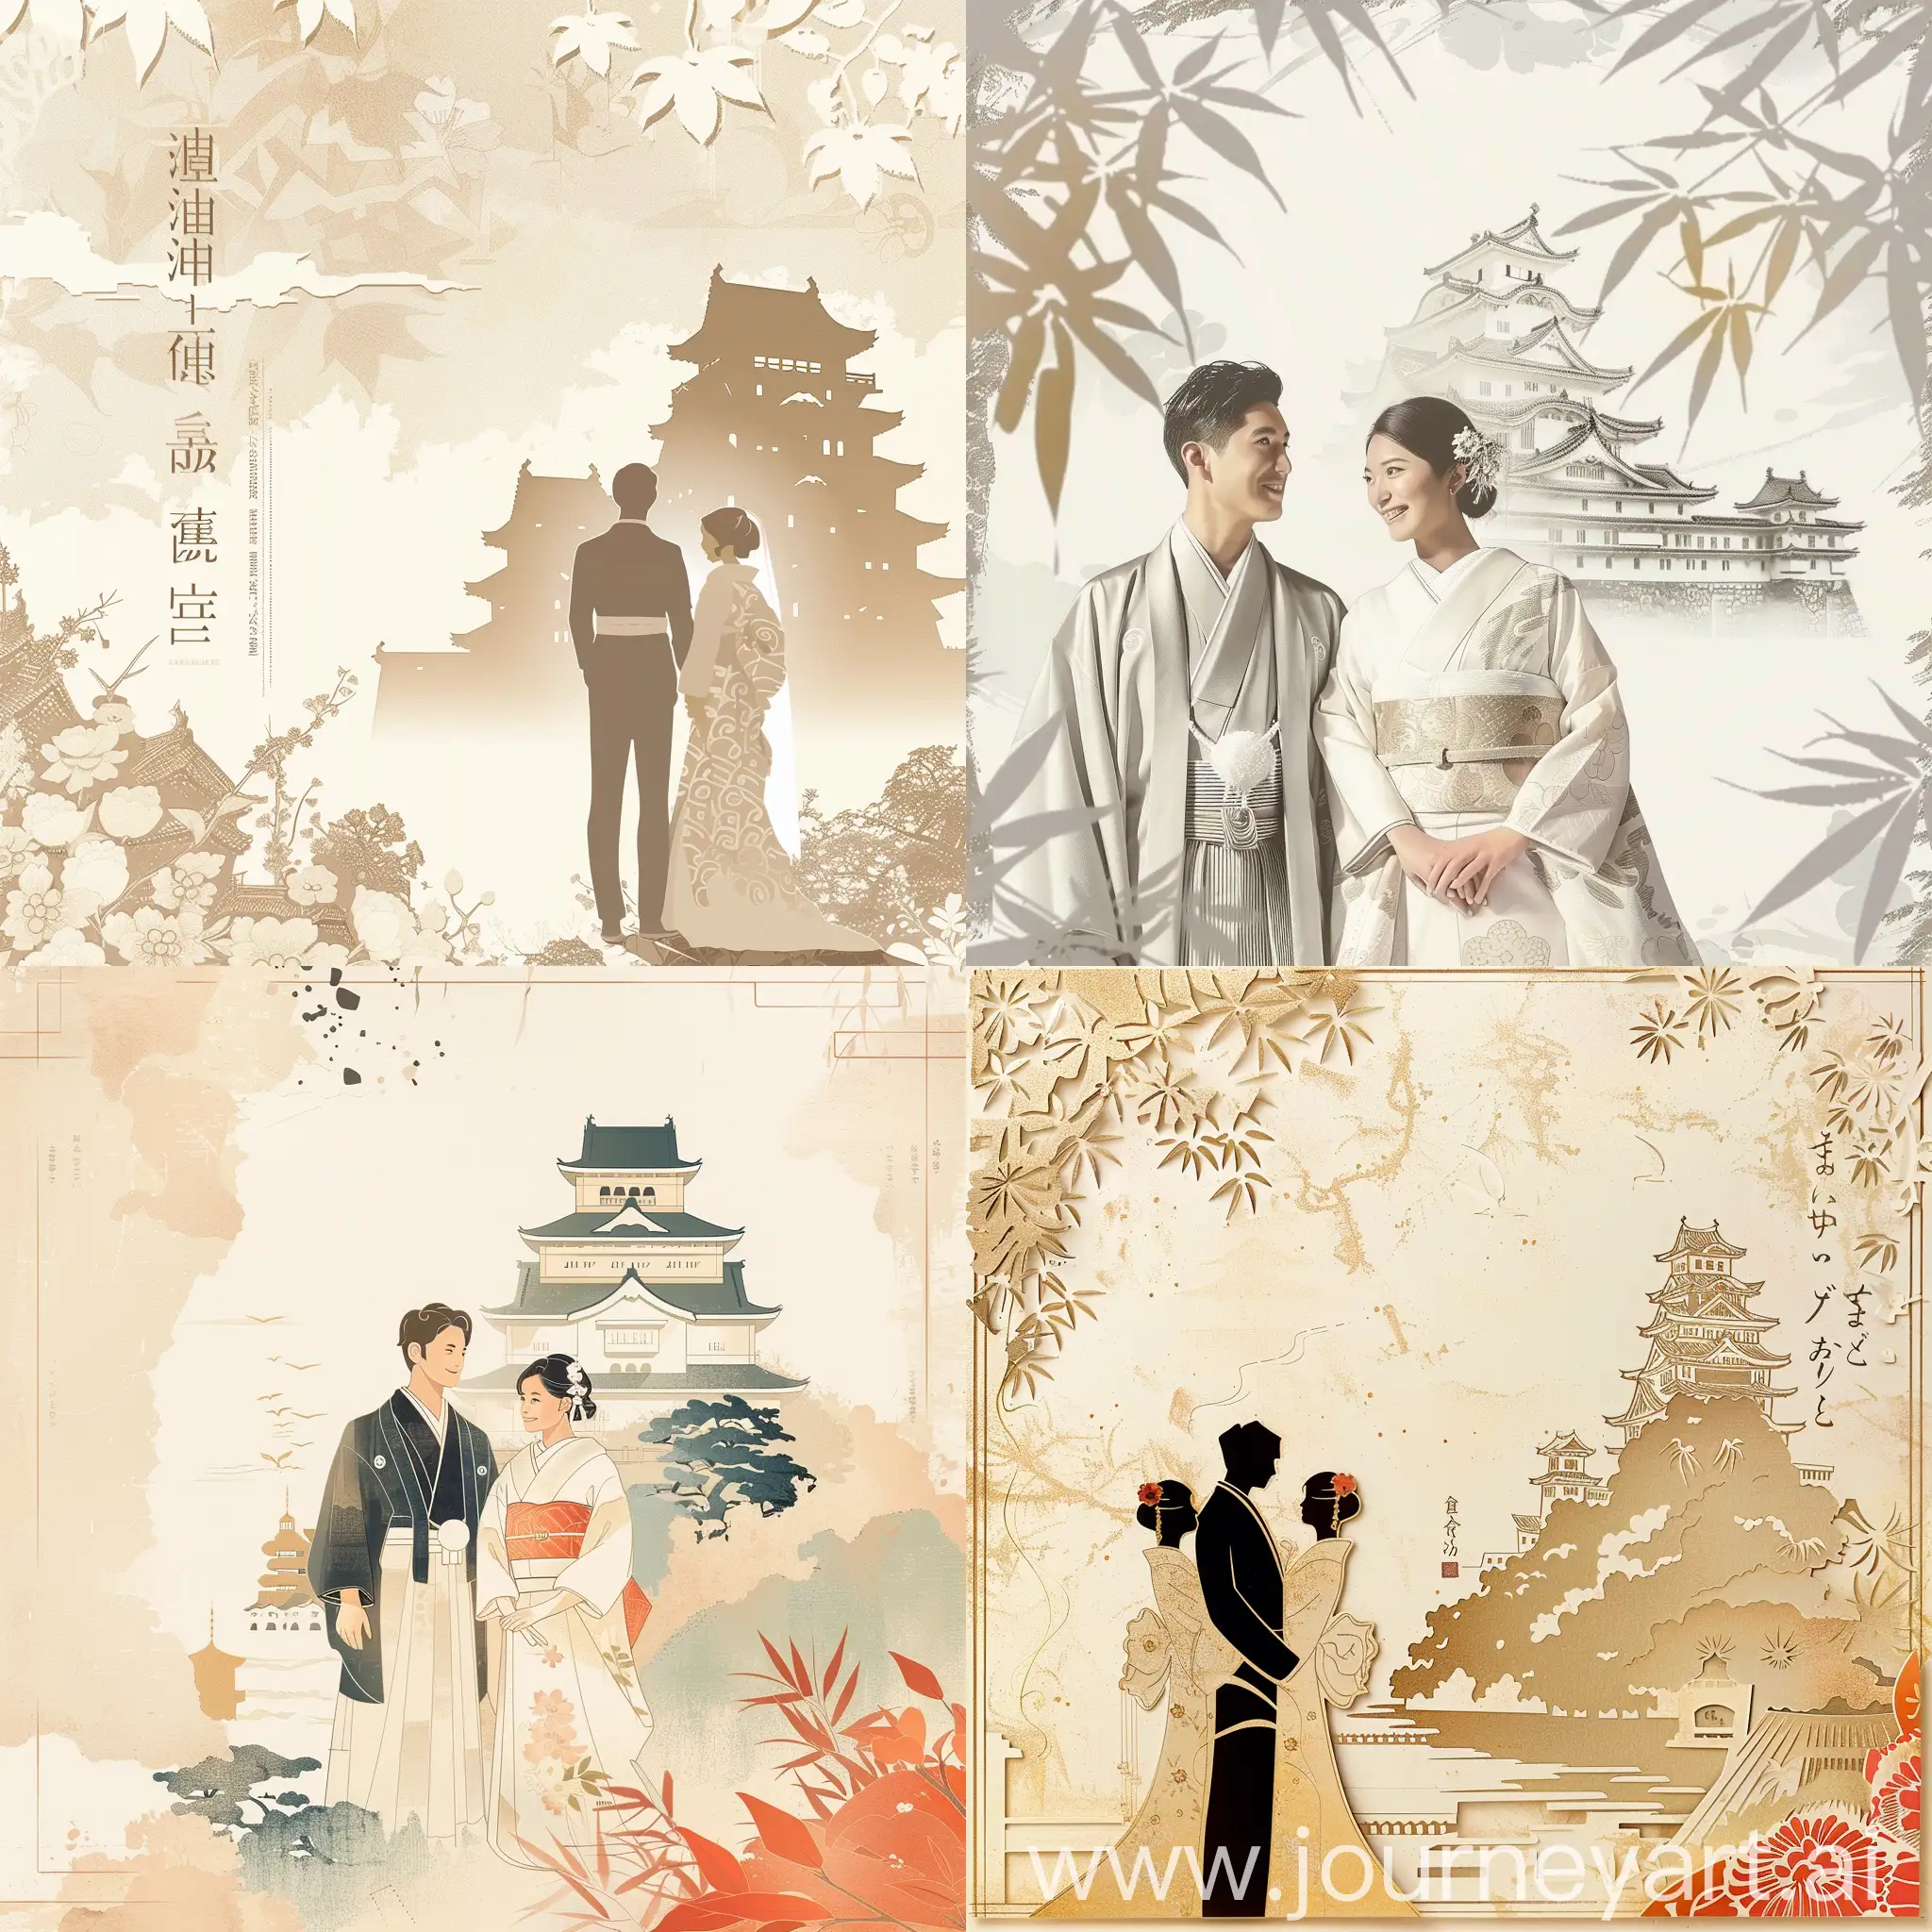 japanese a wedding invitation of the bride and groom, ((traditional wedding style)) affectionately standing front, white japan style, charming, design, delicate shadows, backround castle